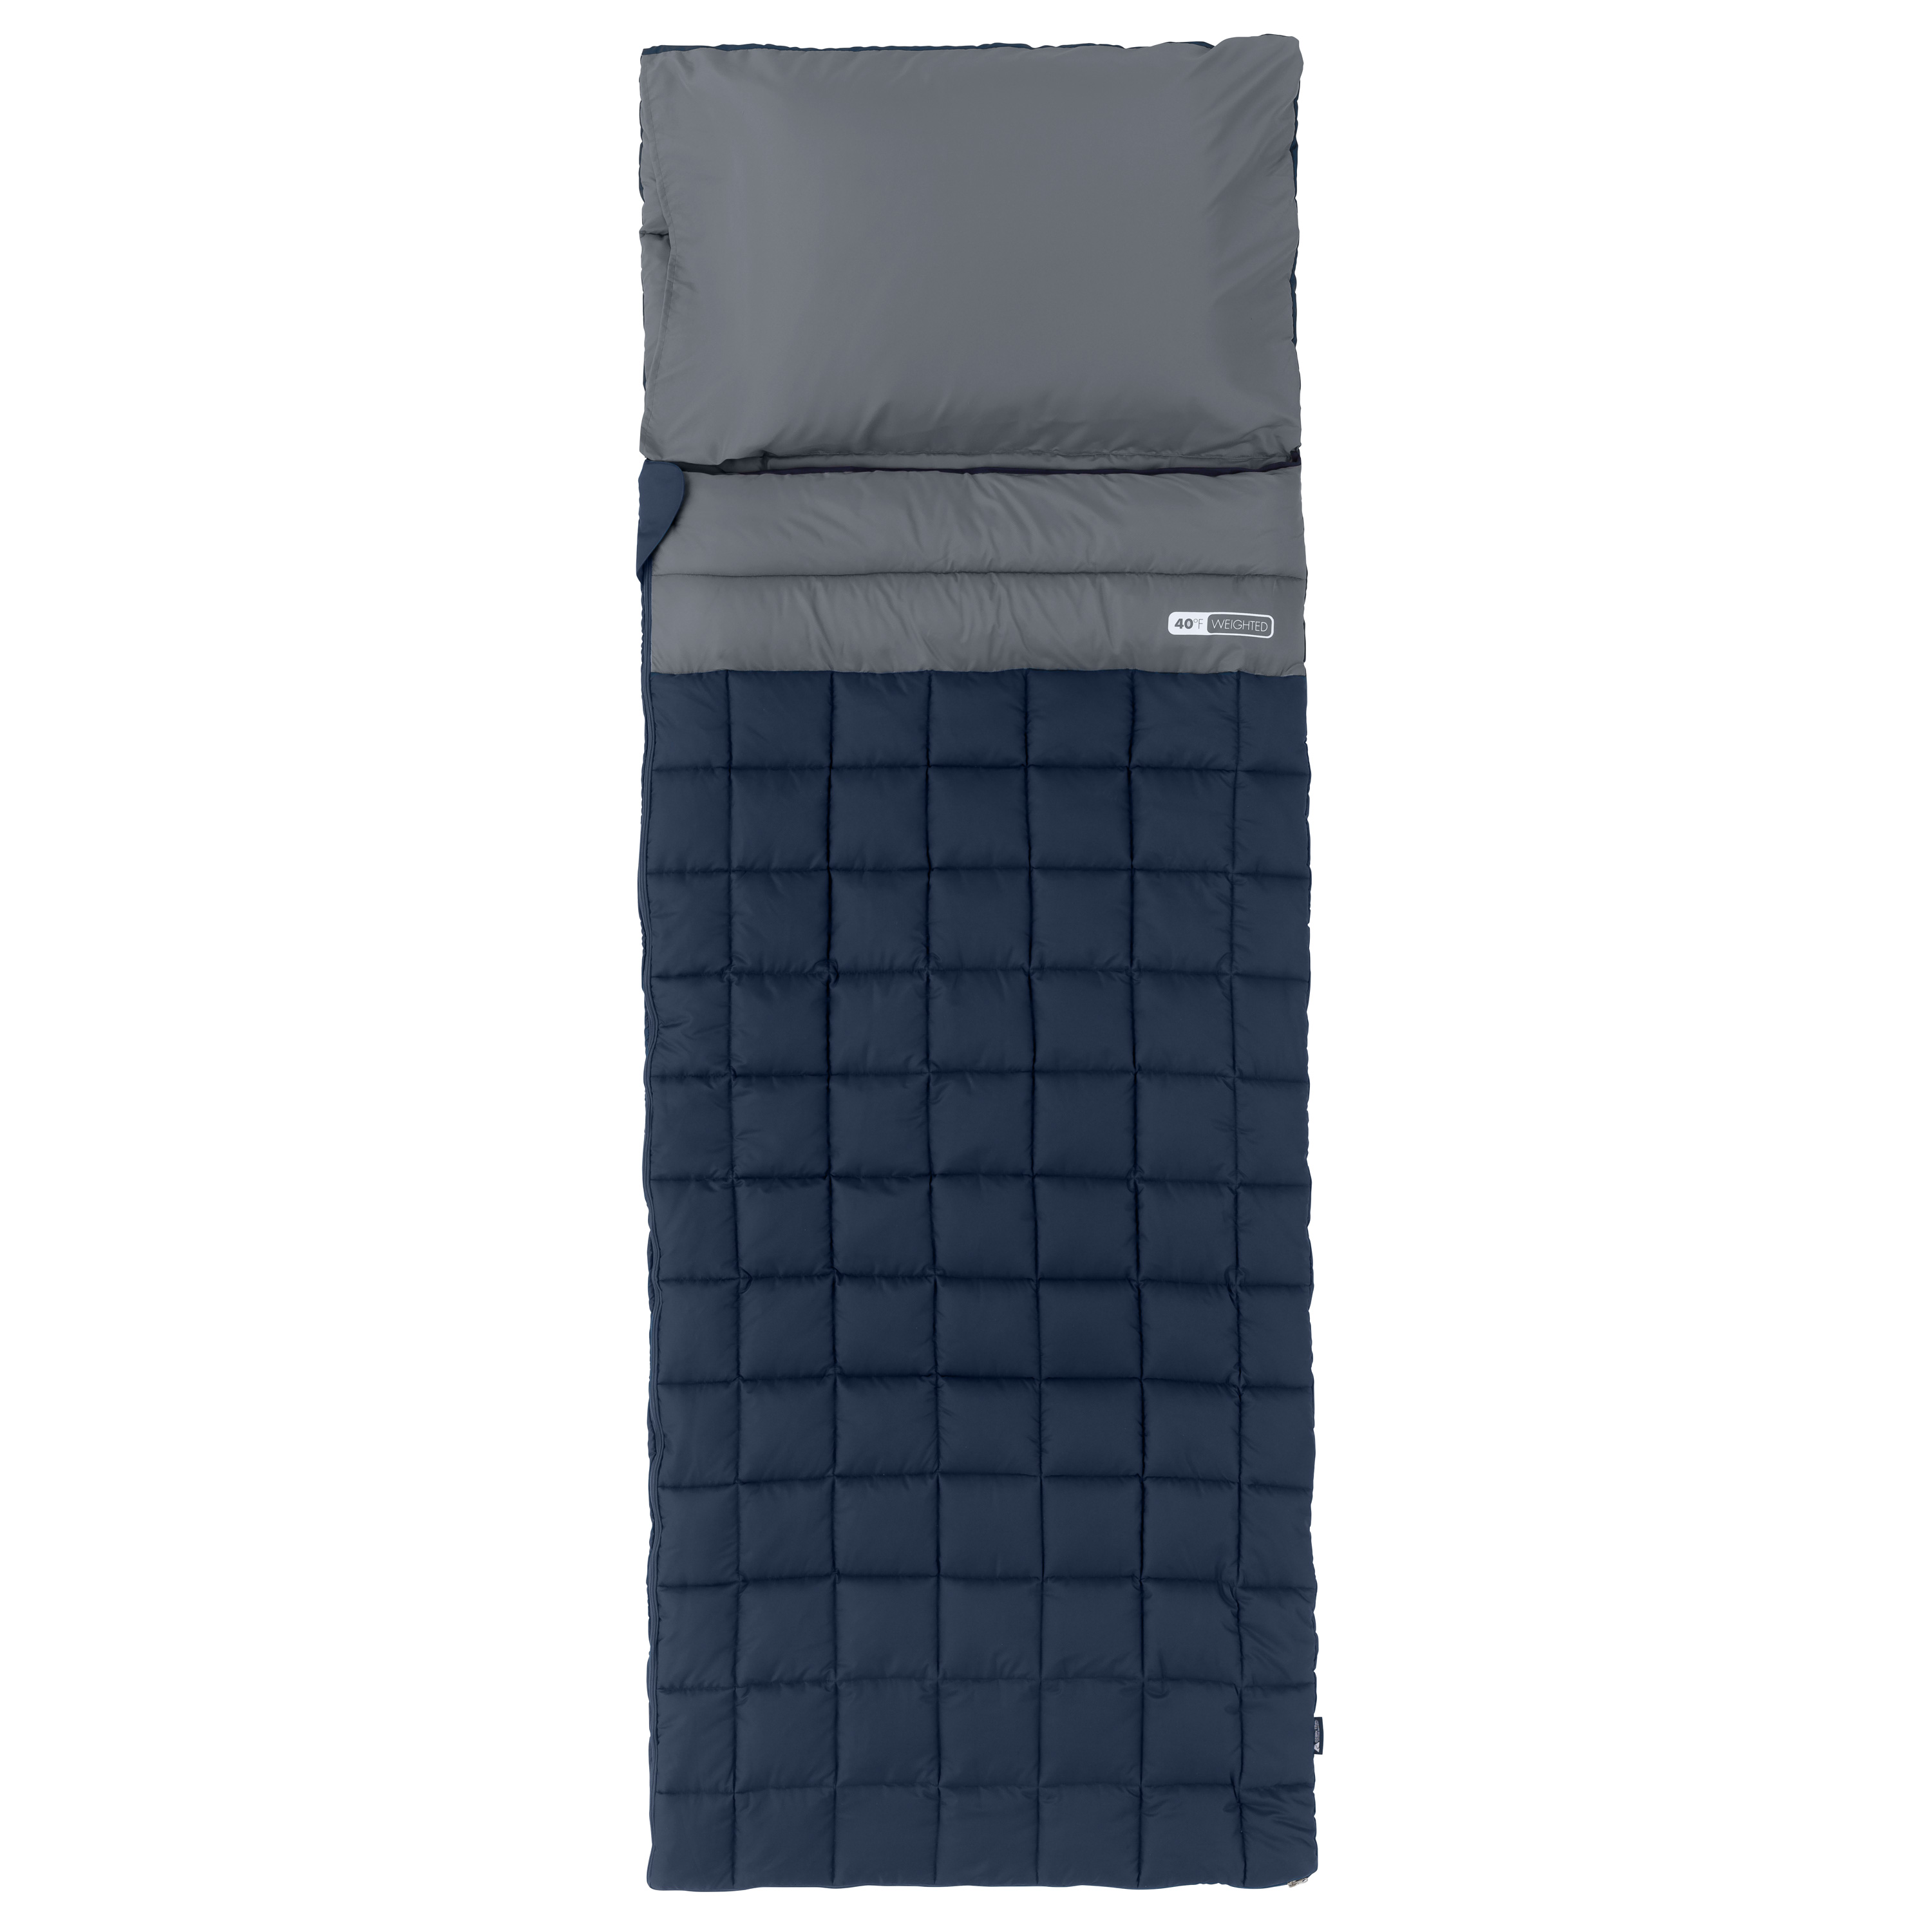 Ozark Trail 40F Weighted Adult Sleeping Bag – Navy & Gray (Size 95 in. x 34 in.) - image 1 of 12